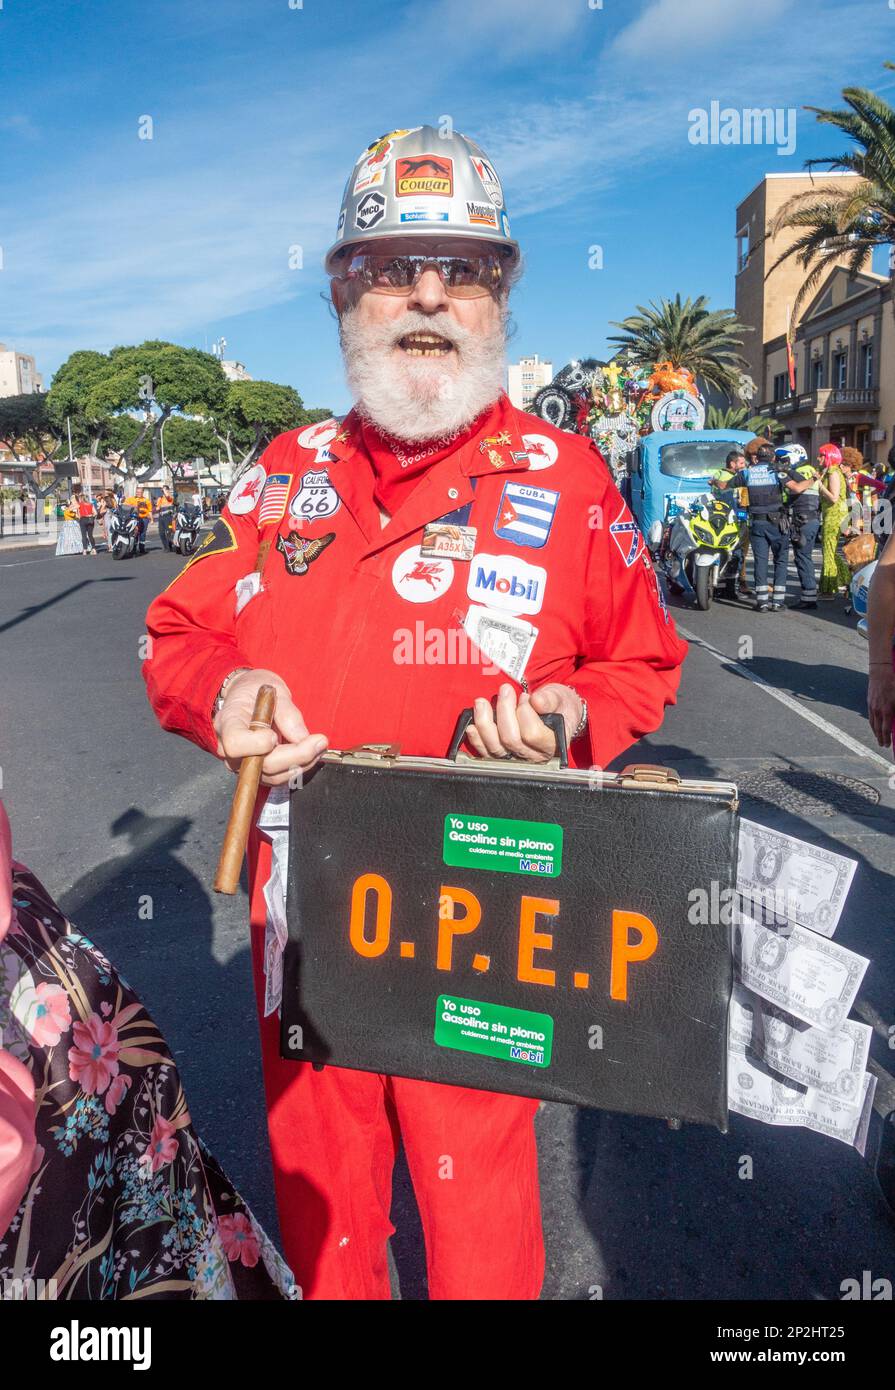 Man in fancy dress at Las Palmas carnaval dressed in red overall and carrying OPEC briefcase full of dollars. Oil industry profits, big bonus, bonuses, global warming...concept Stock Photo